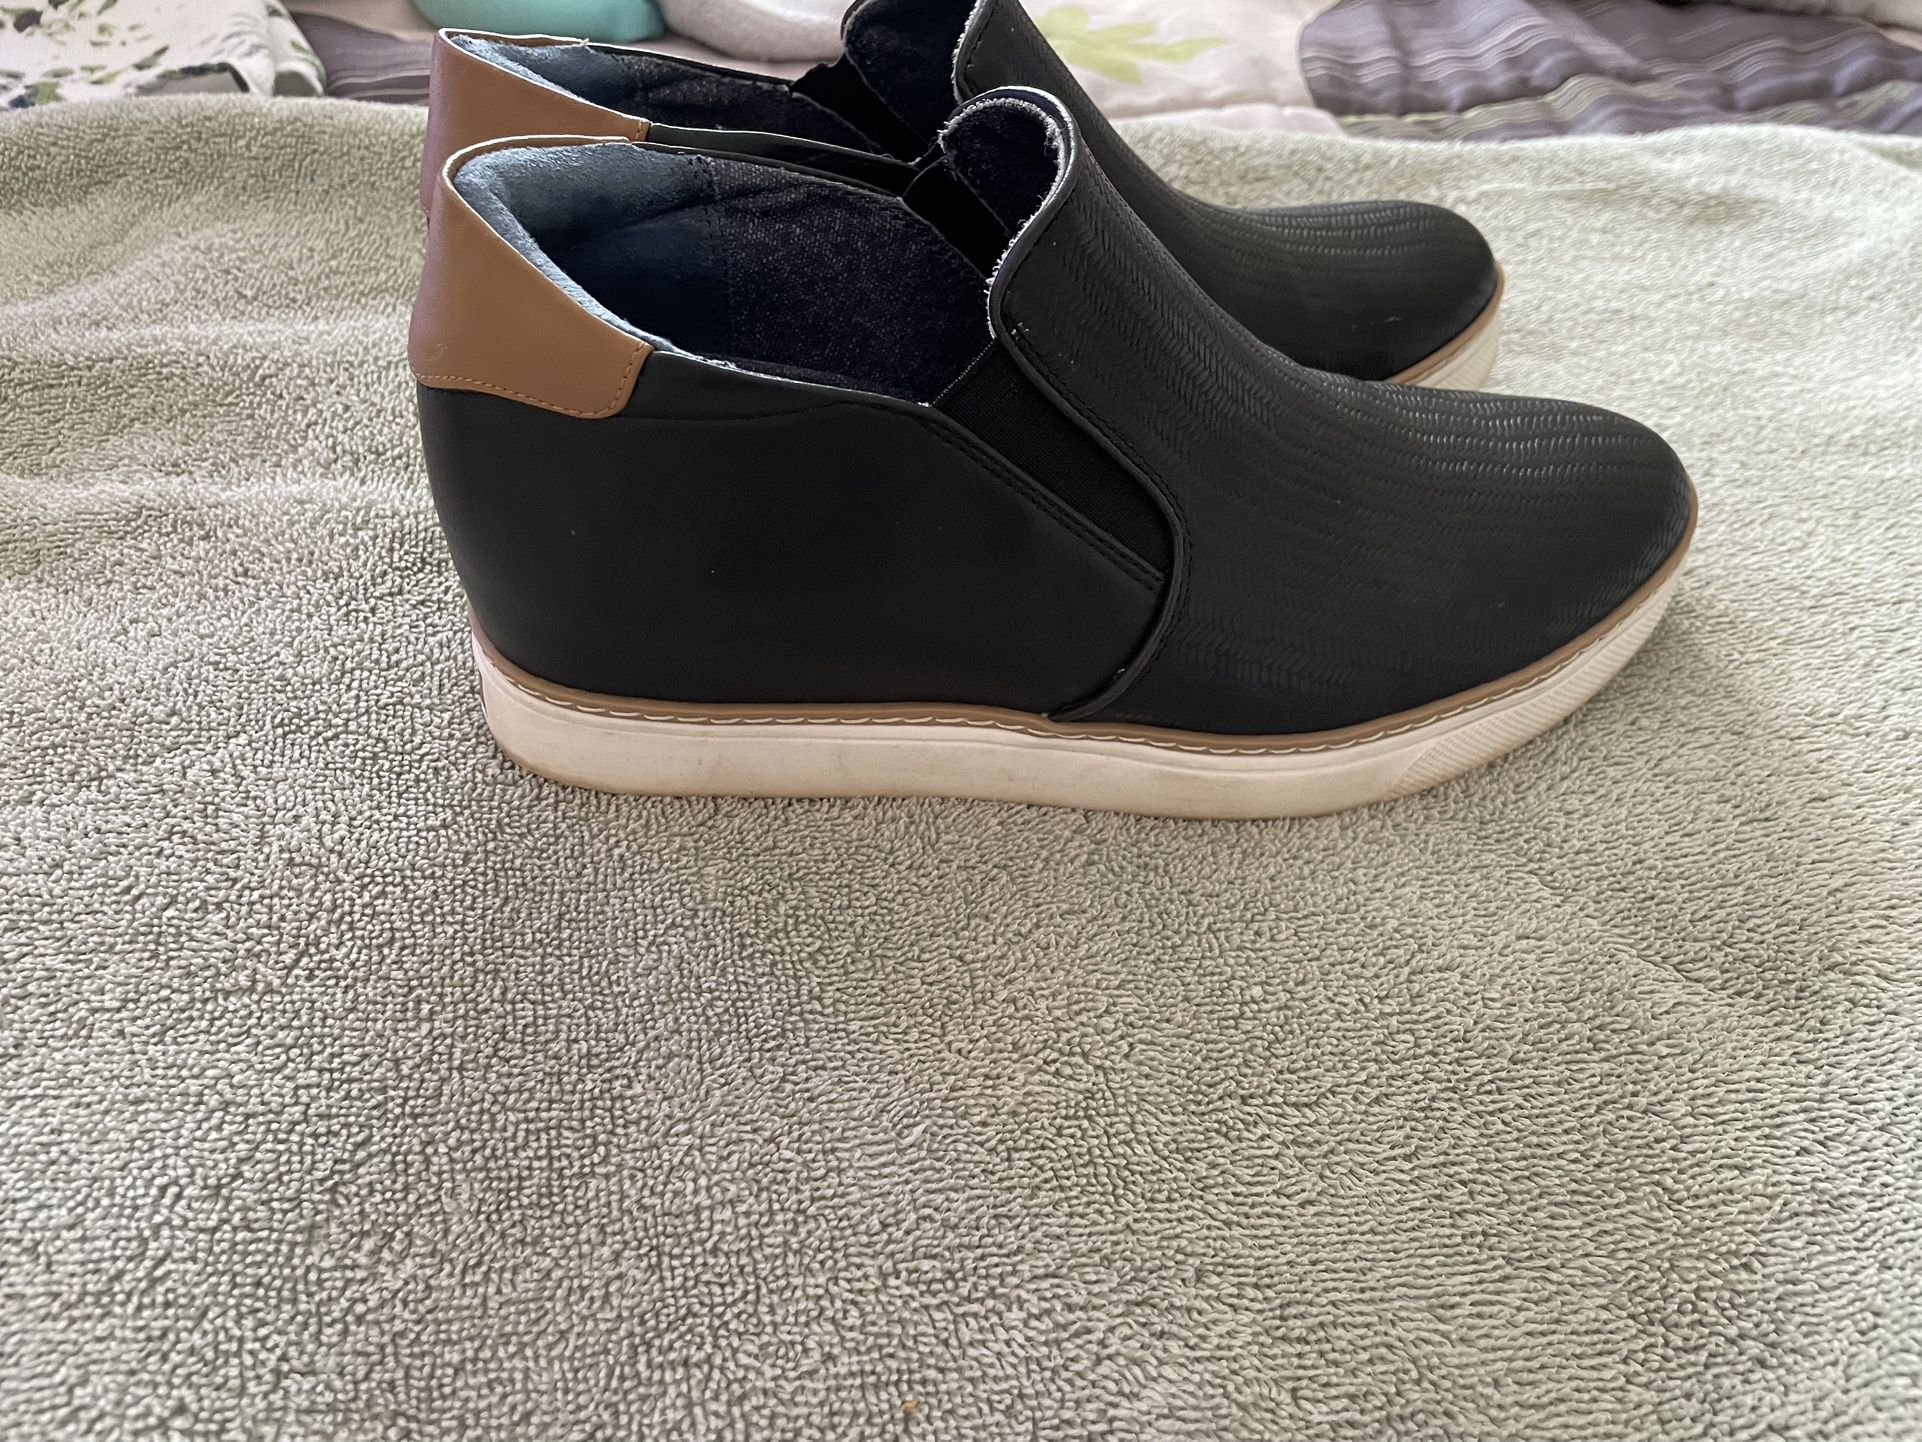 Women’s Dr. Scholl’s black ankle wedge booties size 8.5  